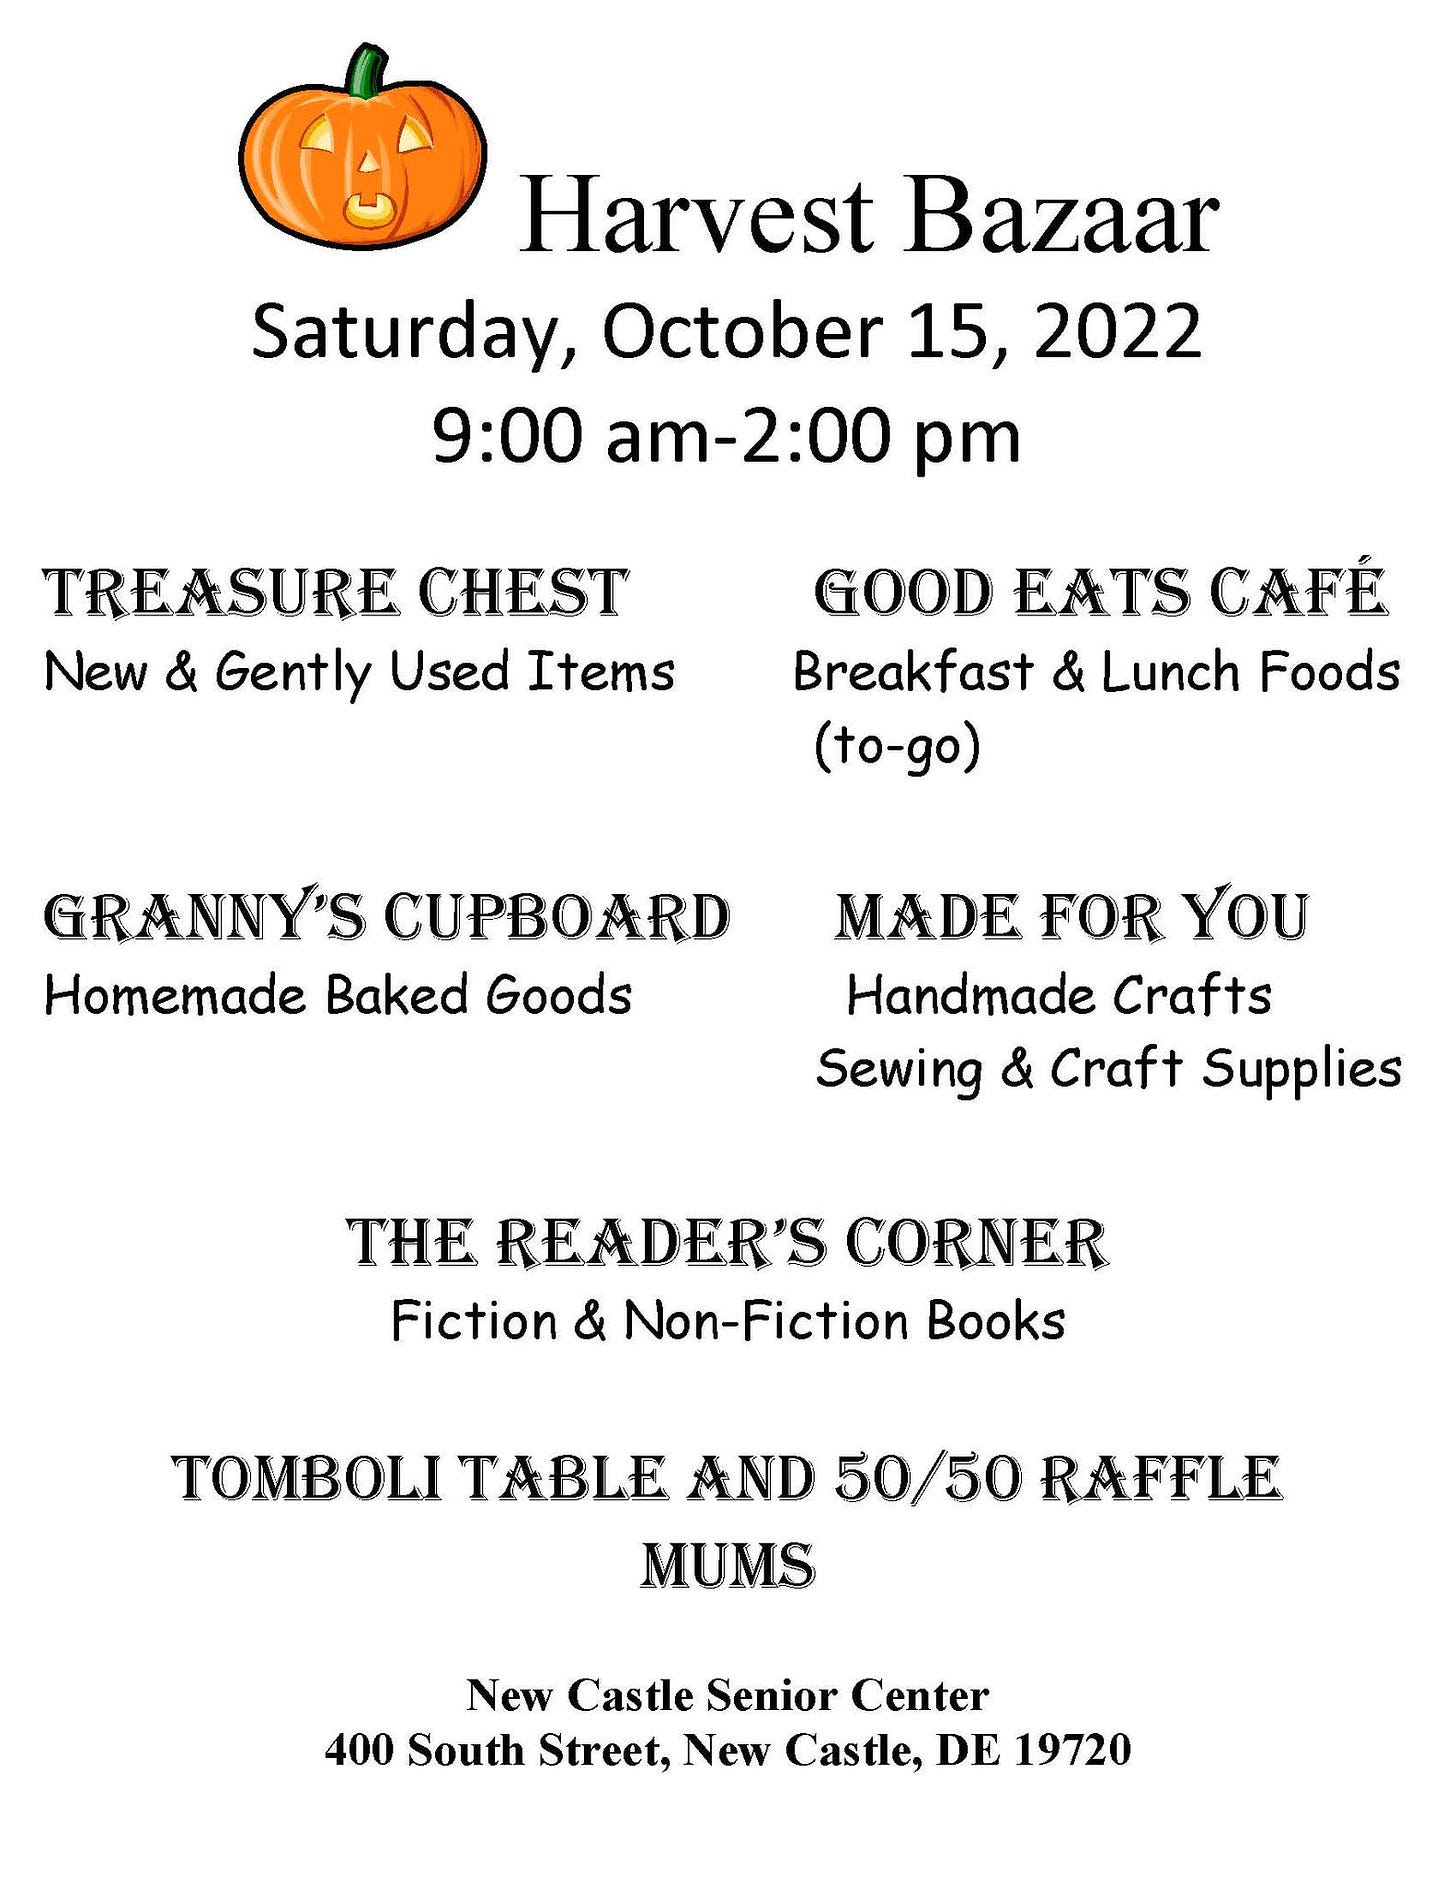 May be an image of text that says 'Harvest Bazaar Saturday, October 15 2022 9:00 am-2:00 2:00 pm TREASURE CHEST New & Gently Used Items GOOD EATS CAFÉ Breakfast & Lunch Foods (to-go) GRANNY'S CUPBOARD Homemade Baked Goods MADE FOR YOU Handmade Crafts Sewing & Craft Supplies THE READER'S CORNER Fiction & Non-Fiction Books TOMBOLI TABLE AND 50/50 RAFFLE MUMS New Castle Senior Center 400 South Street, New Castle, DE 19720'